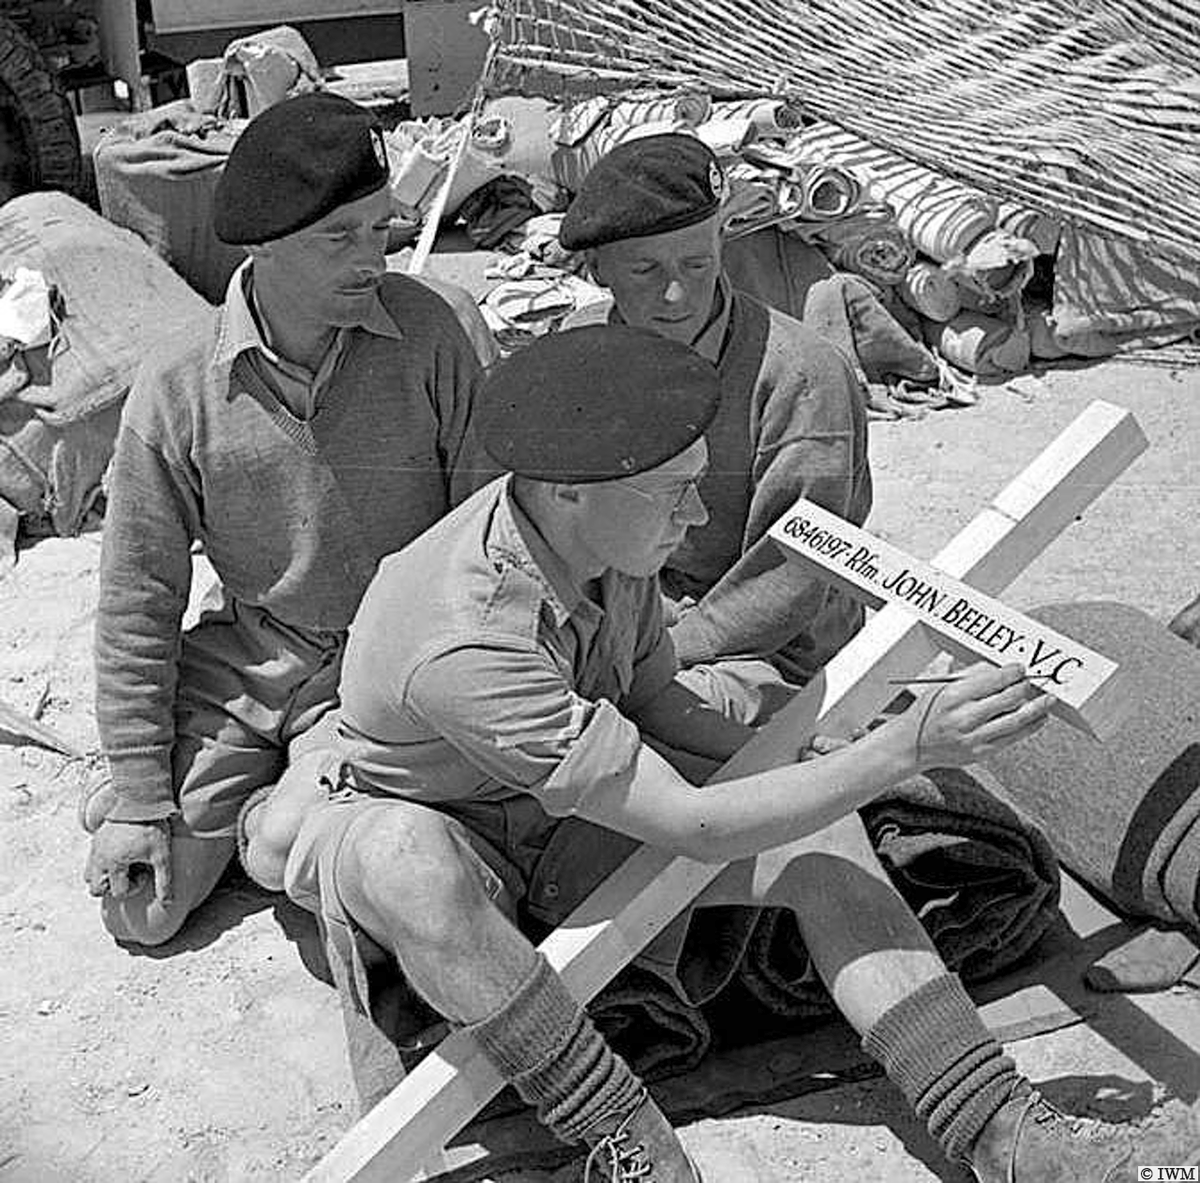 #OTD in 1942, North Africa. Comrades of Rifleman John Beeley VC from 1 KRRC working on a cross to be placed over his grave. #WW2 #HISTORY